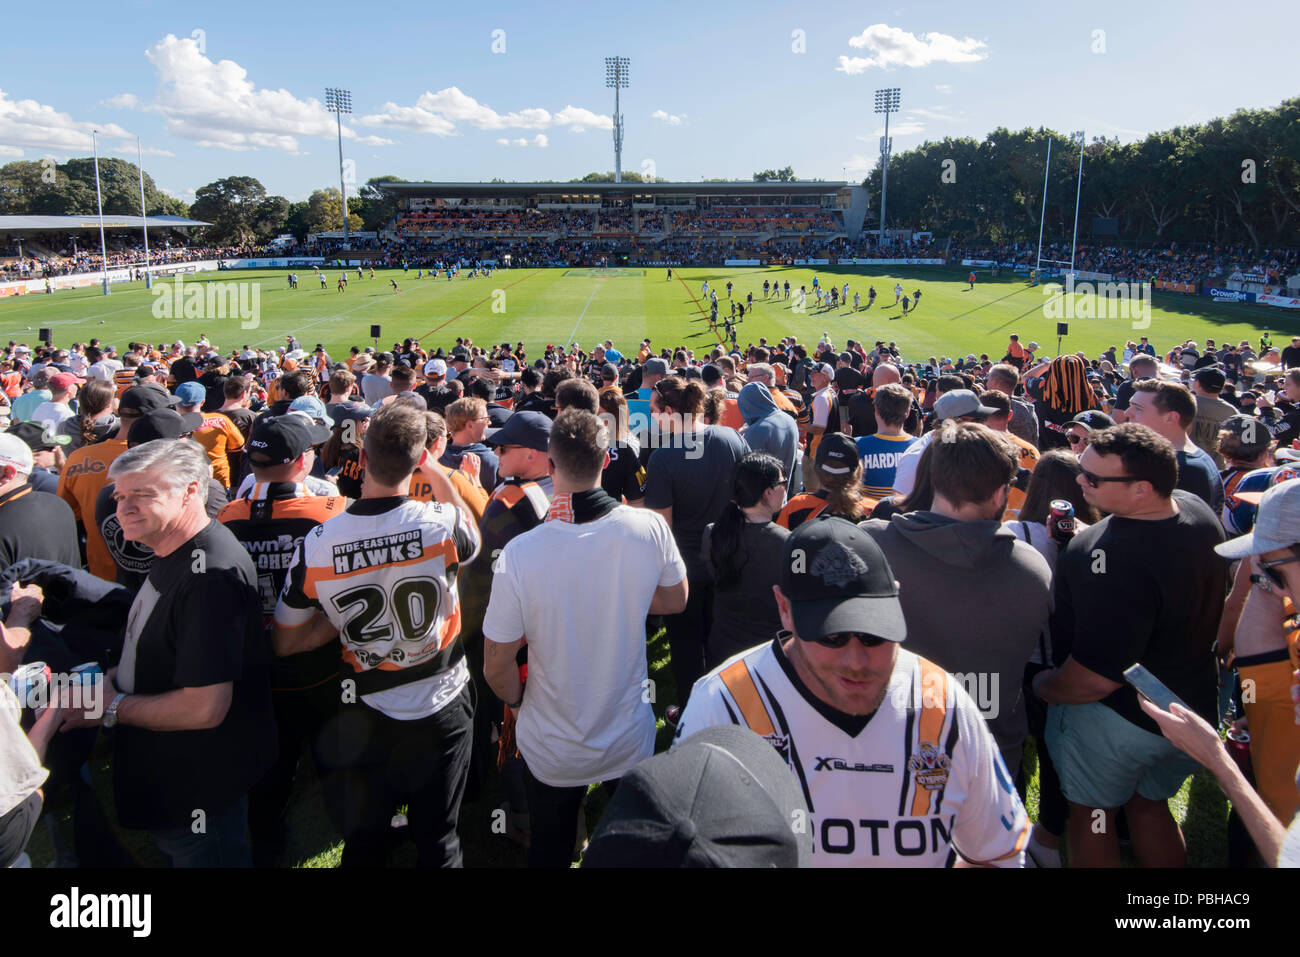 Round 16 of the NRL season saw WestsTigers take on The Gold Coast Titans at Sydney's Leichhardt Oval in front of a near capacity crowd of Tigers fans Stock Photo